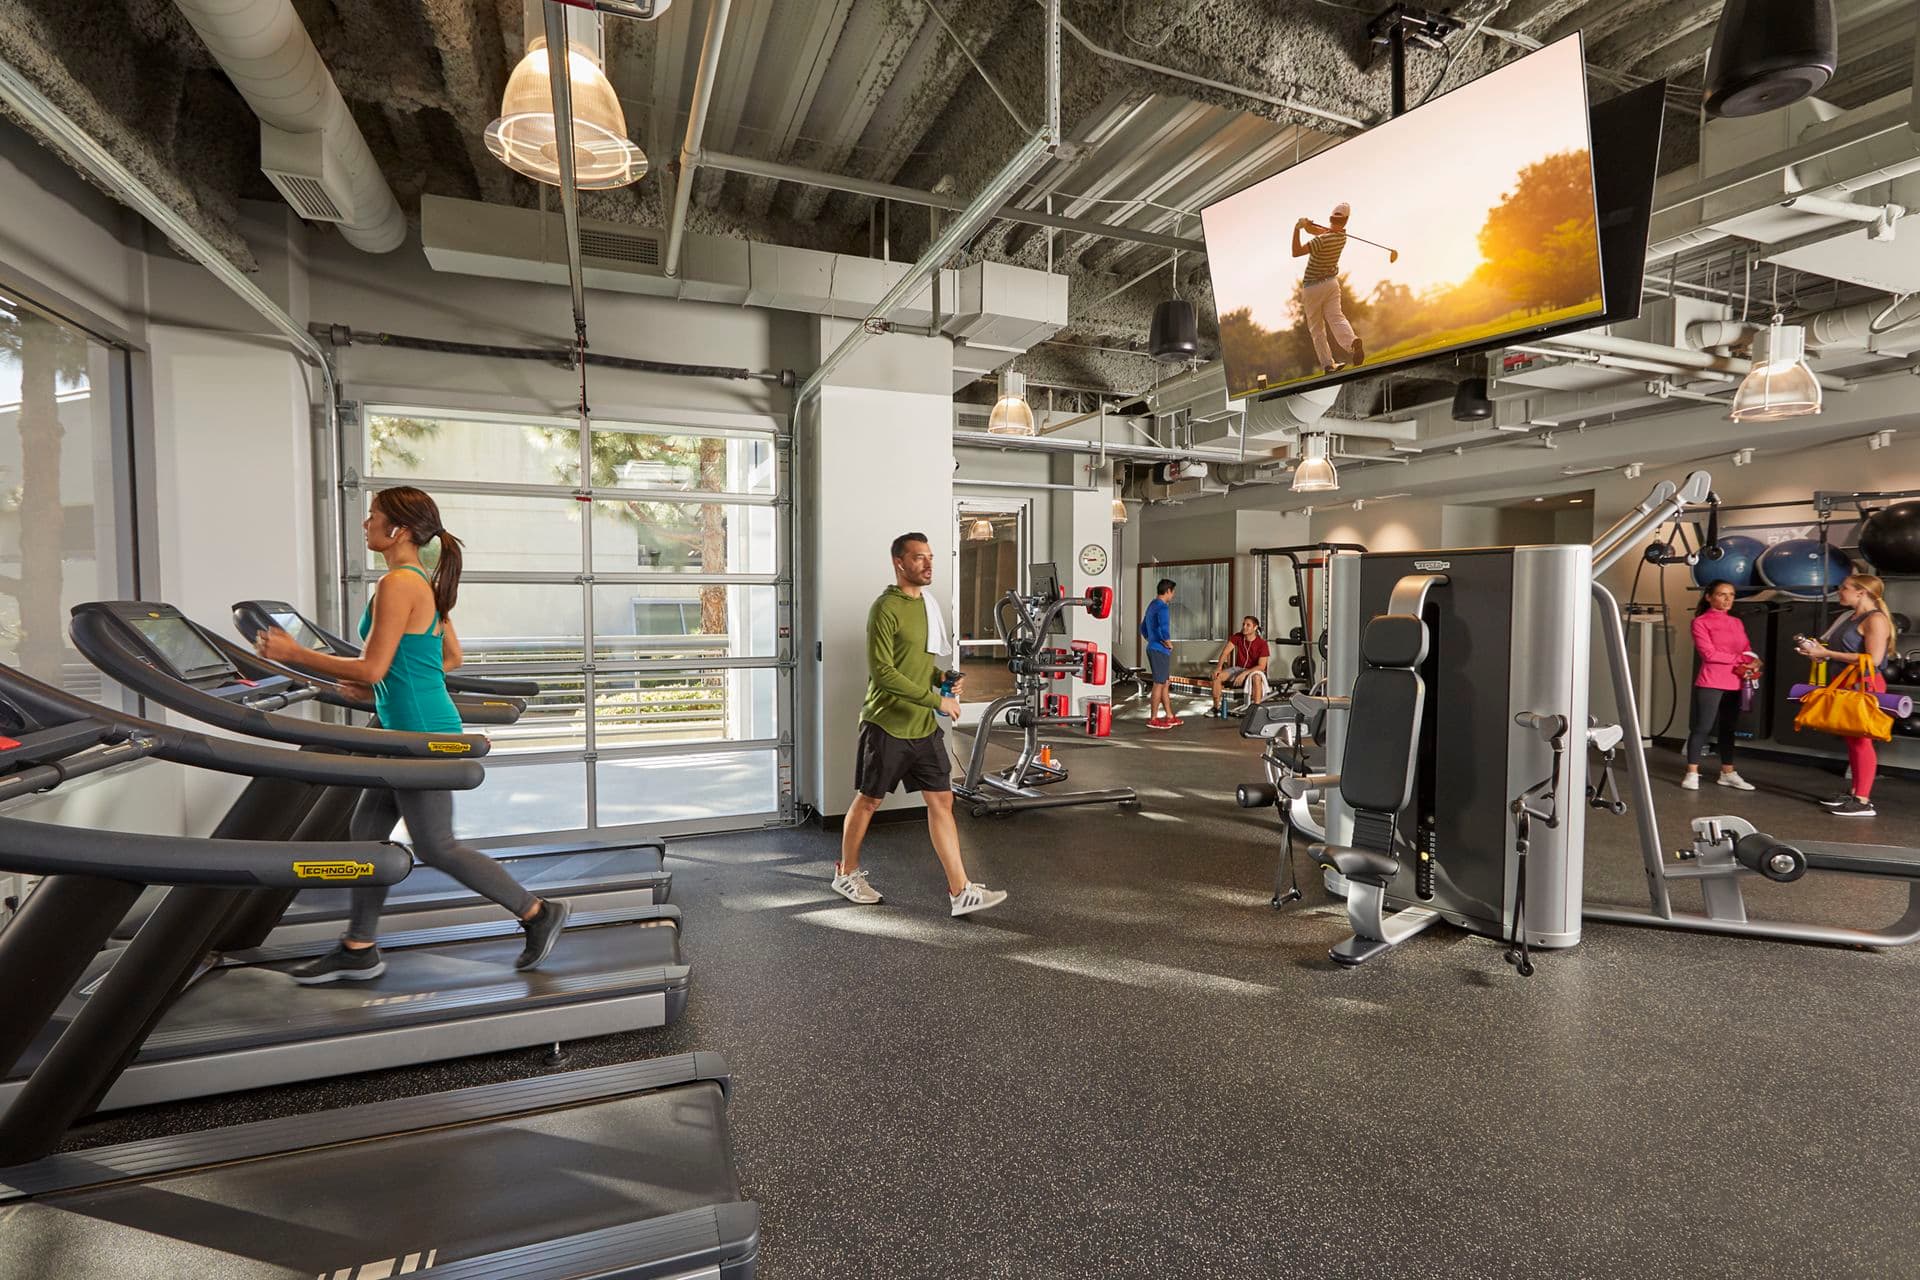 Interior view of Fitness Center at La Jolla Reserve in San Diego, CA.